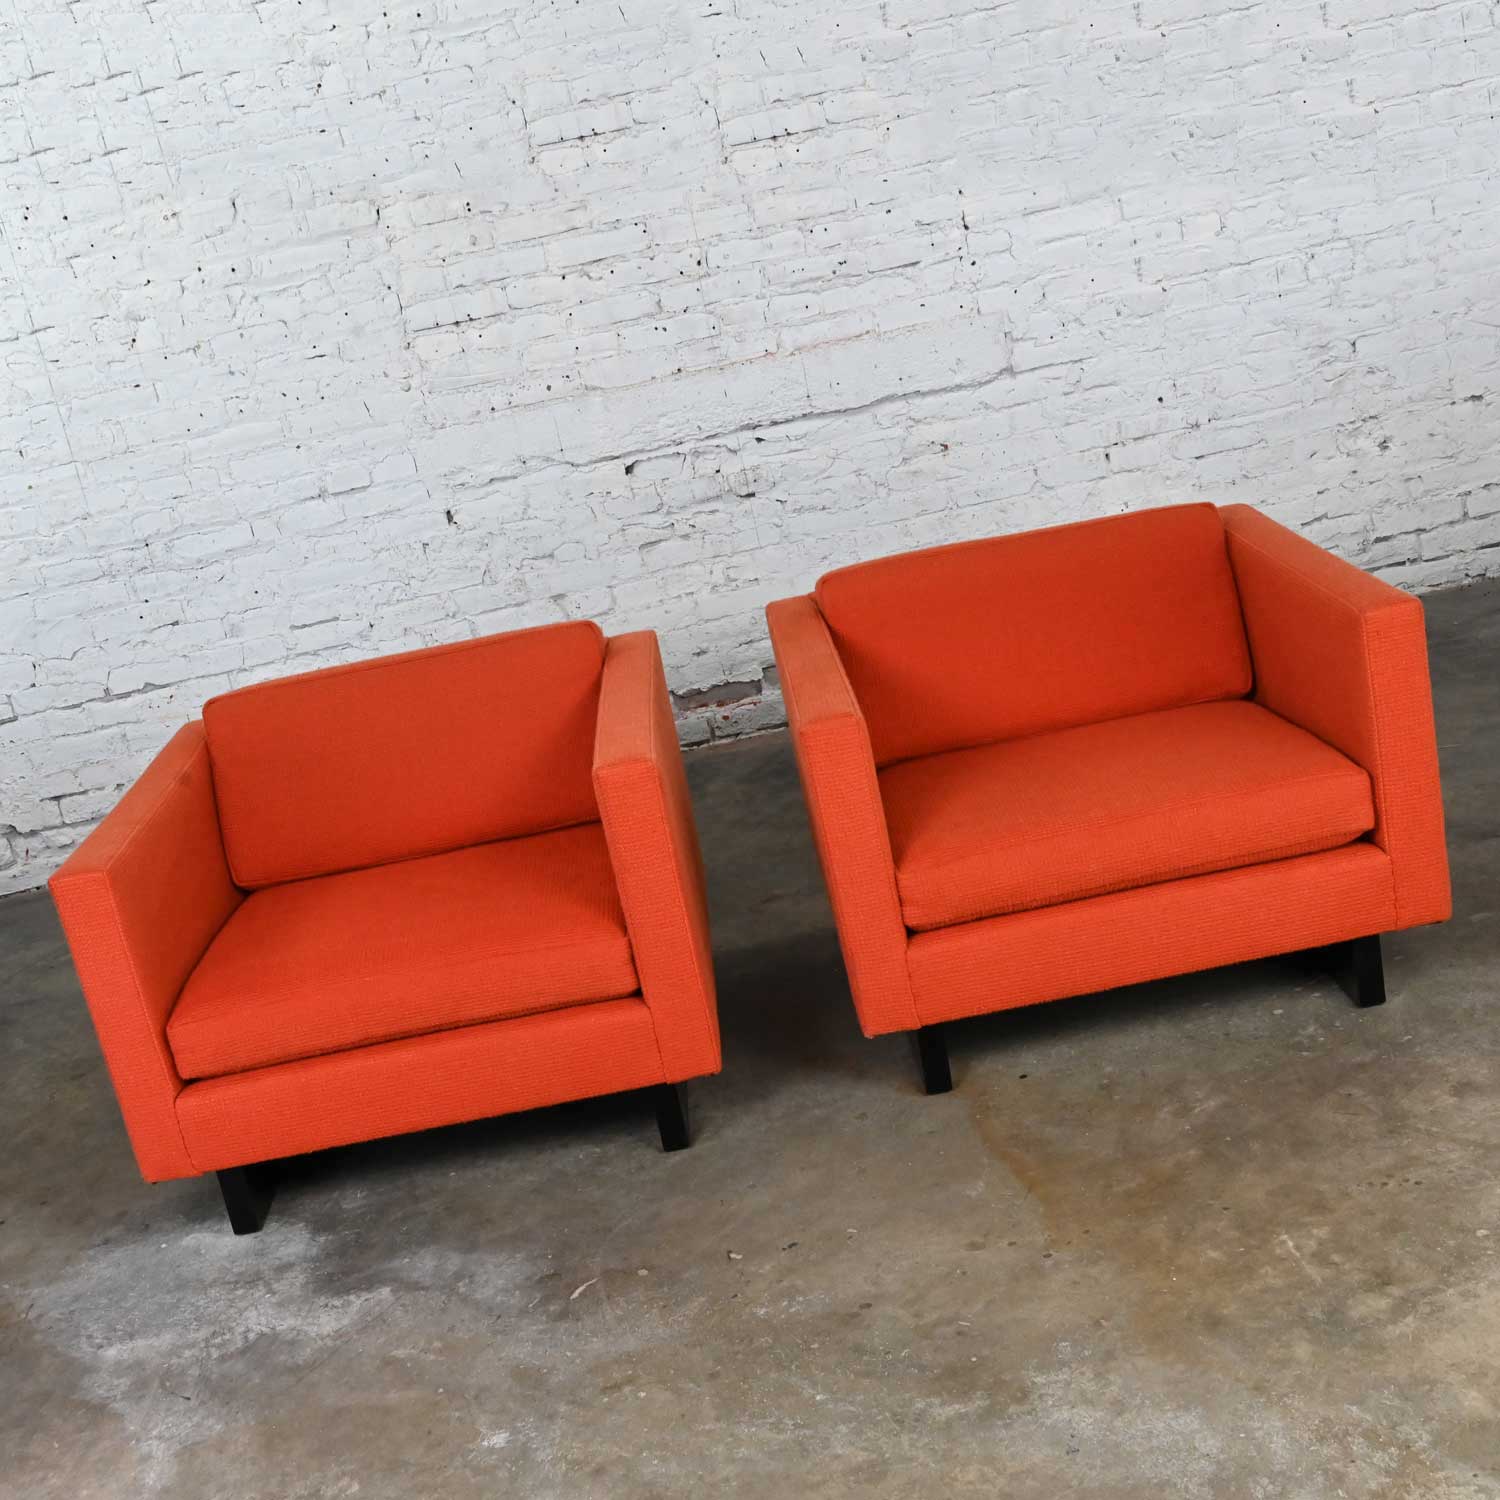 1970’s MCM to Modern Harvey Probber Club Chairs Orange 1571 Tuxedo with Black Painted Sleigh Bases a Pair